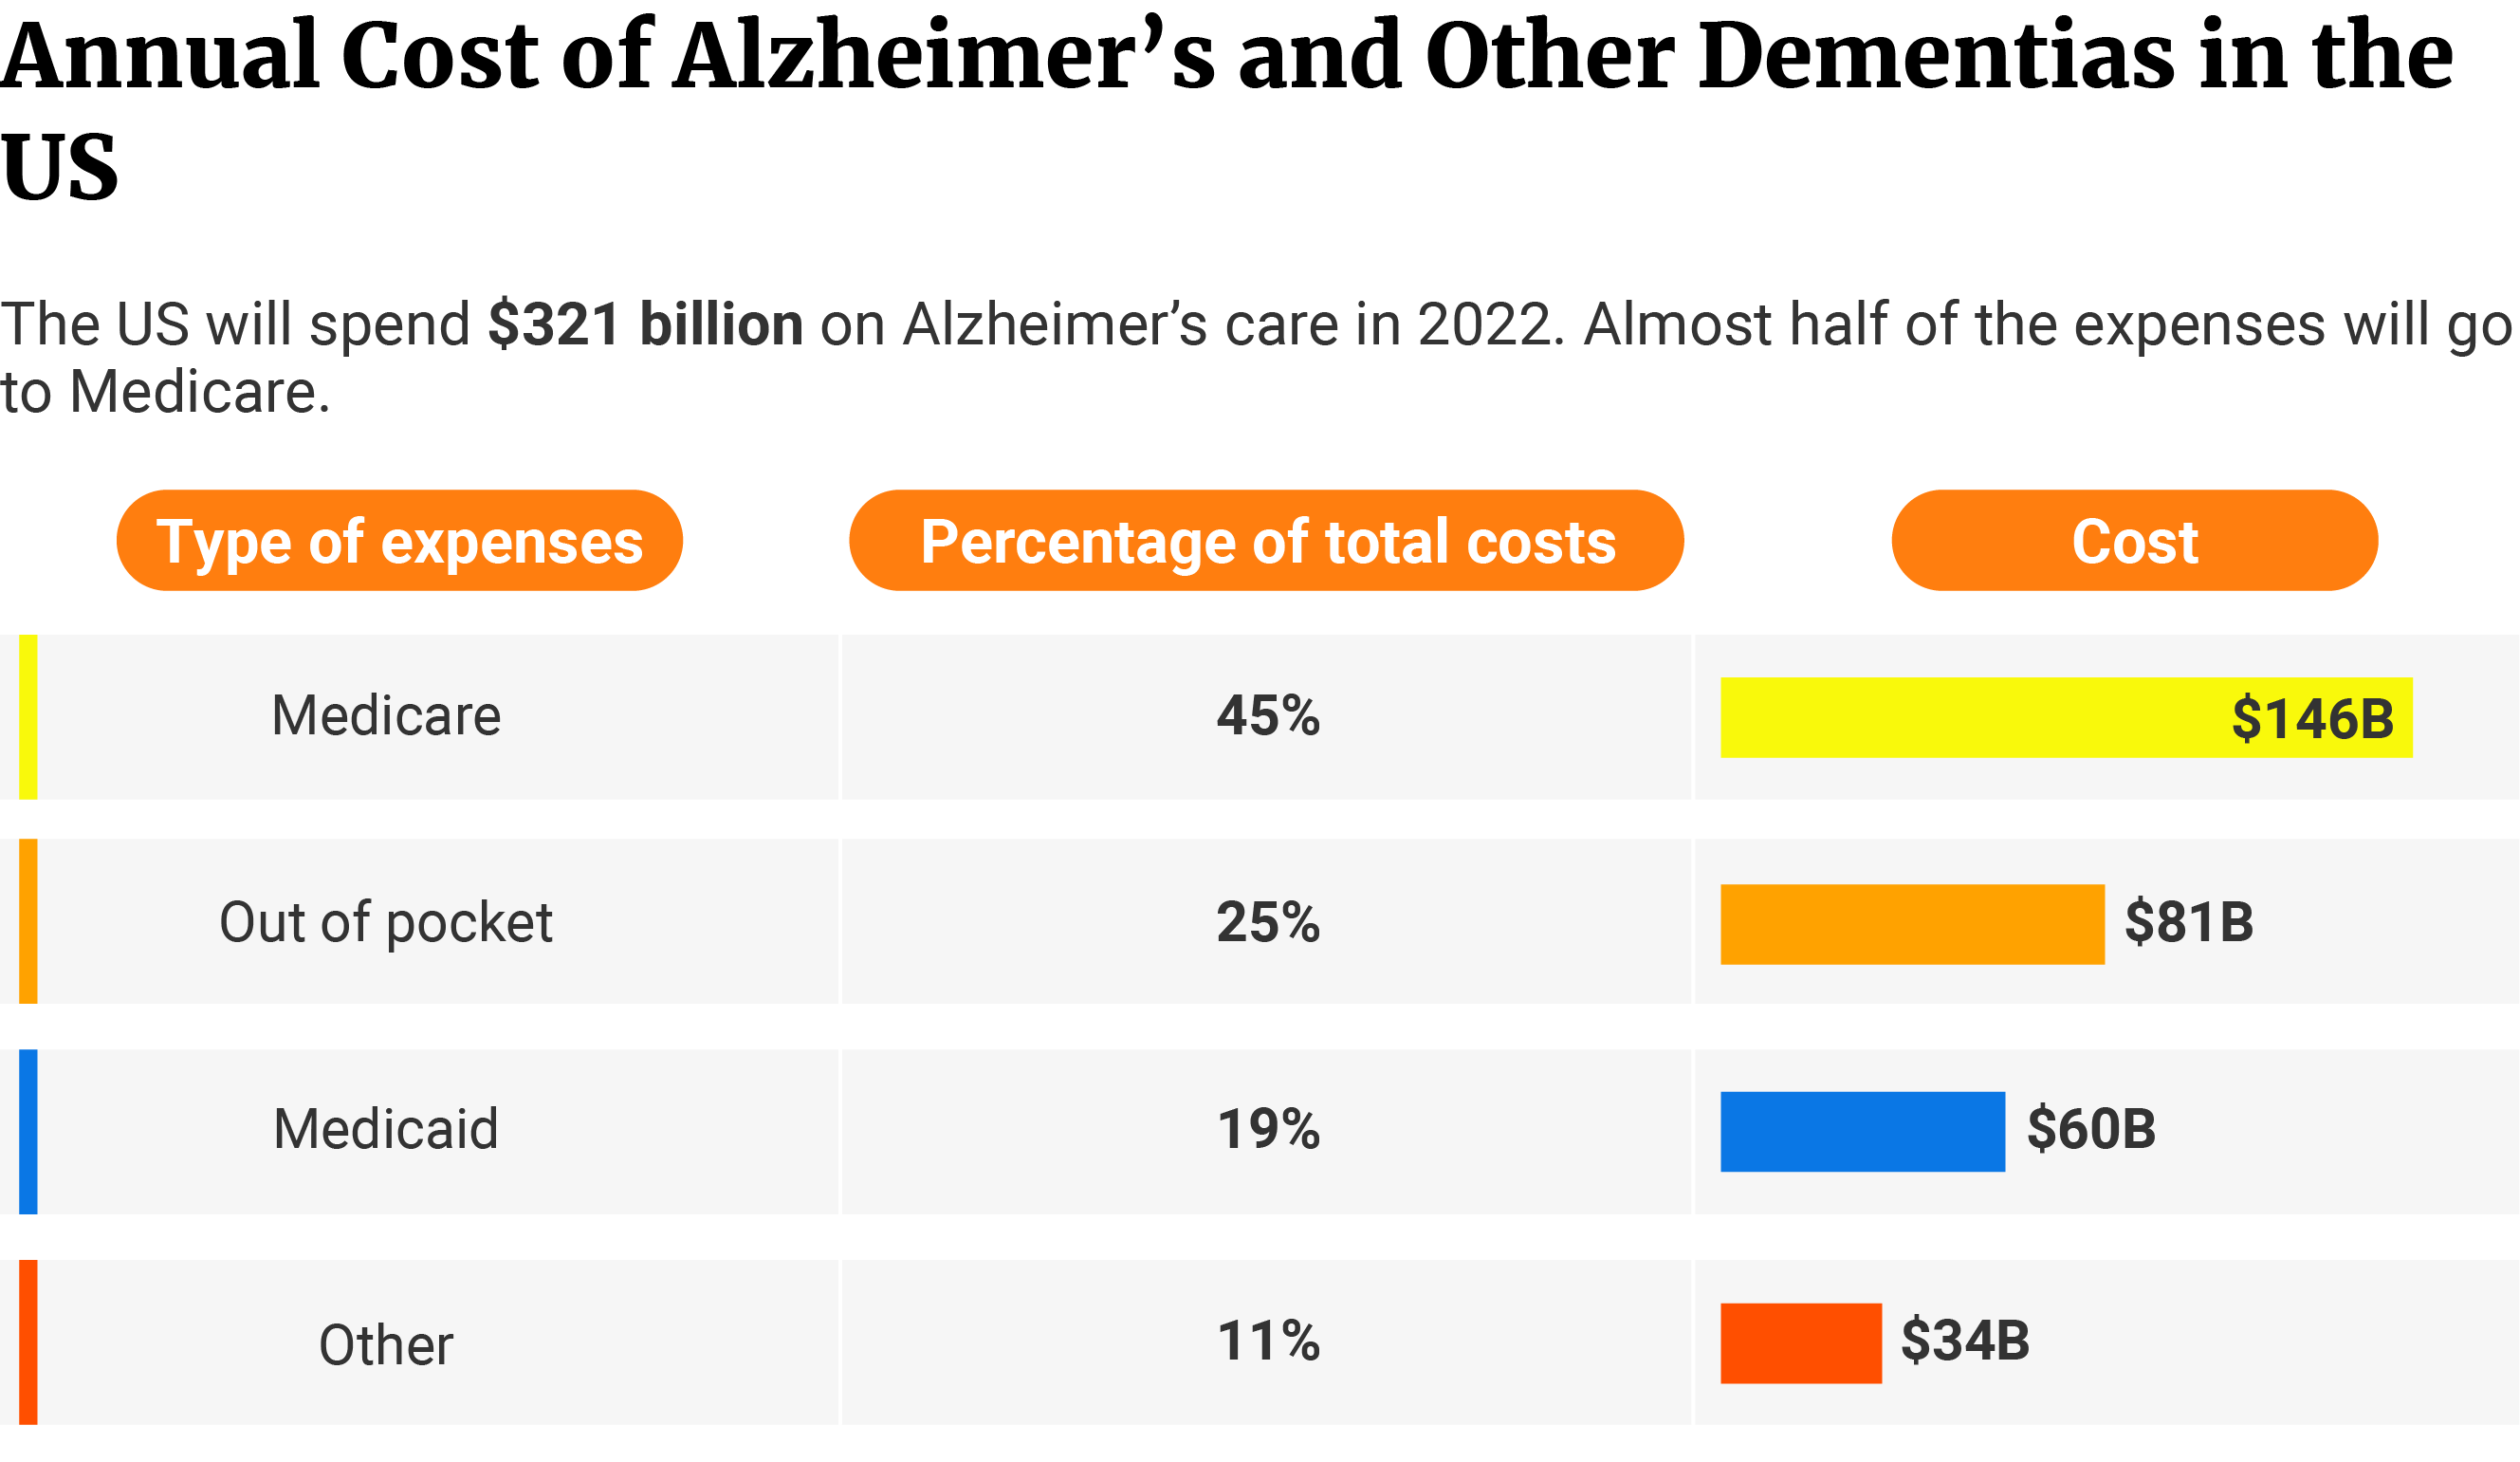 Table showing 45% of Alzheimer’s cost went to Medicare with $146 billion, 25% to out-of-pocket expenses with $81 billion, 19% to Medicaid with $60 billion, and 11% to other expenses with $34 billion.